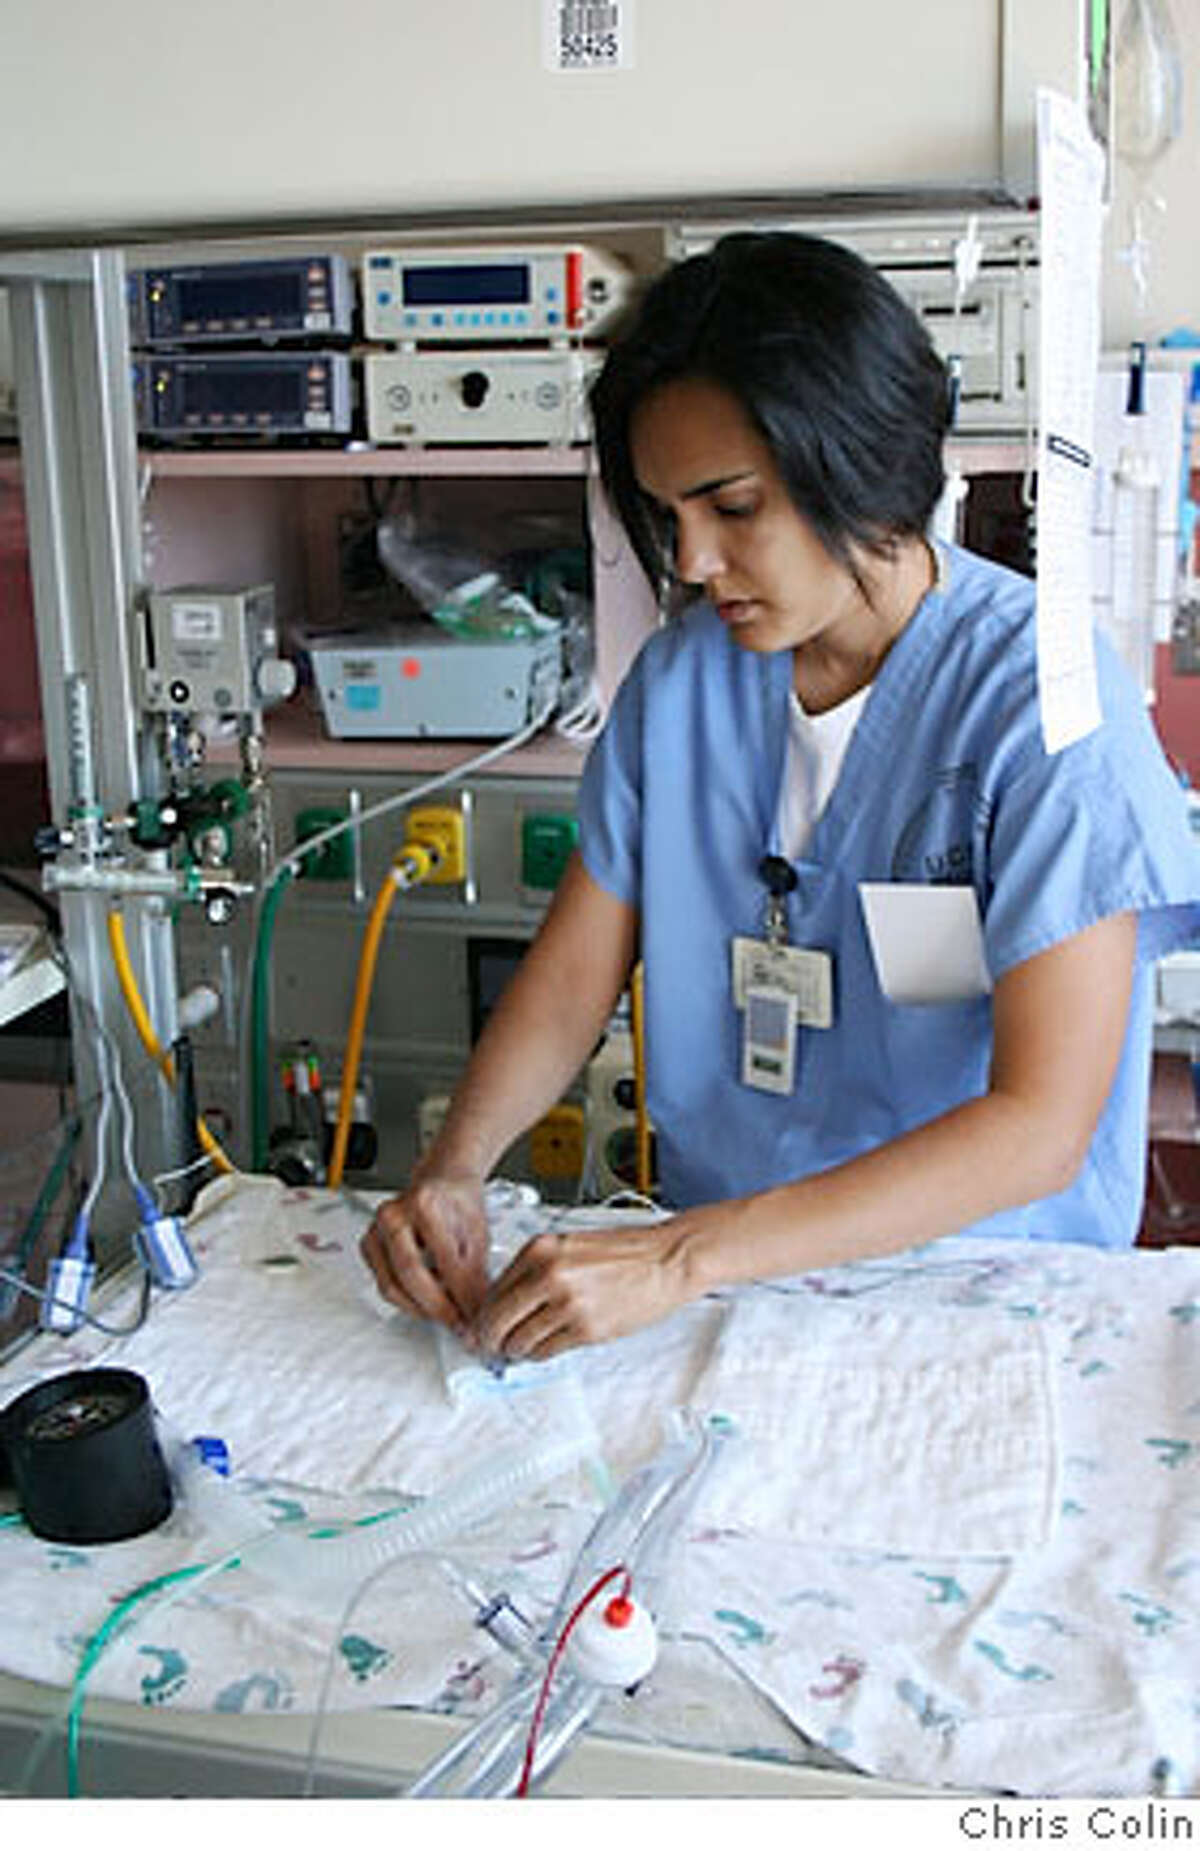 Melitta Hernandez, a nurse working at UCSF's Intensive Care Nursery. Photo by Chris Colin